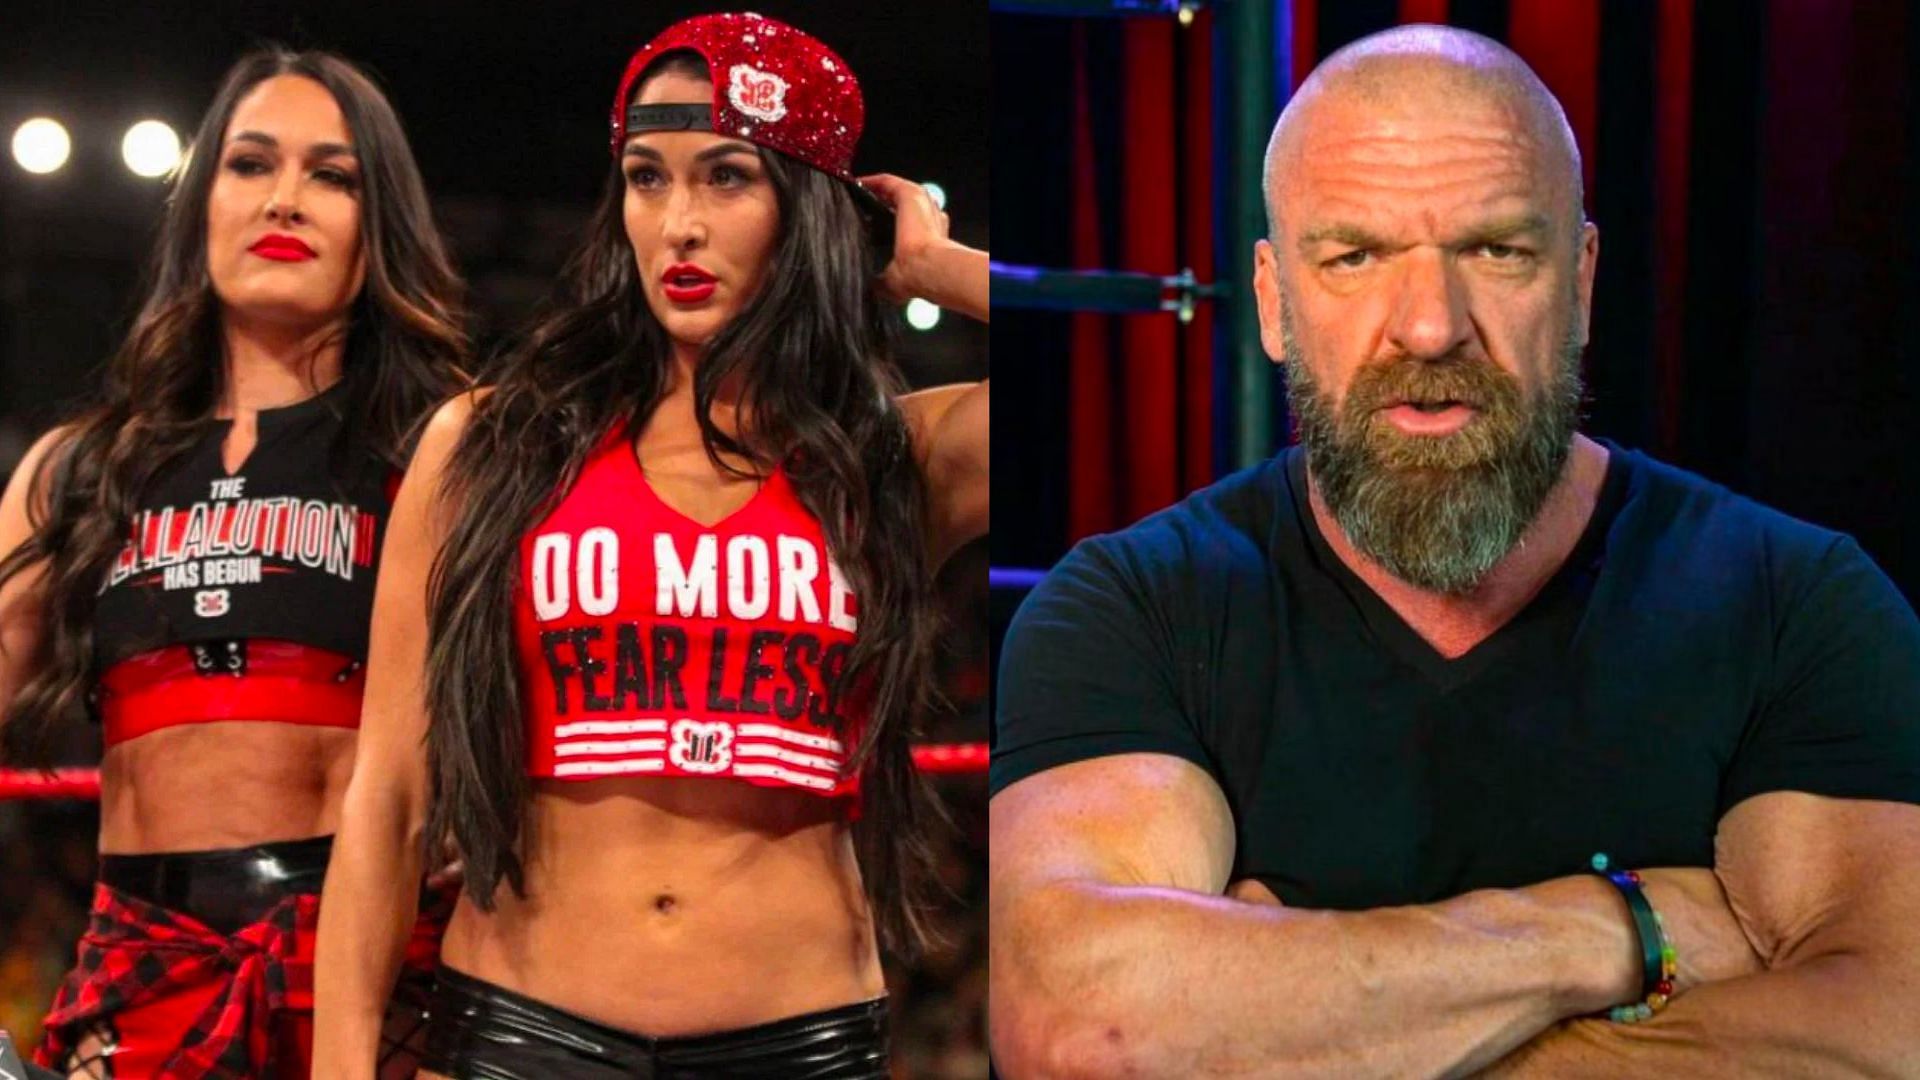 The Bella Twins fired shots at WWE